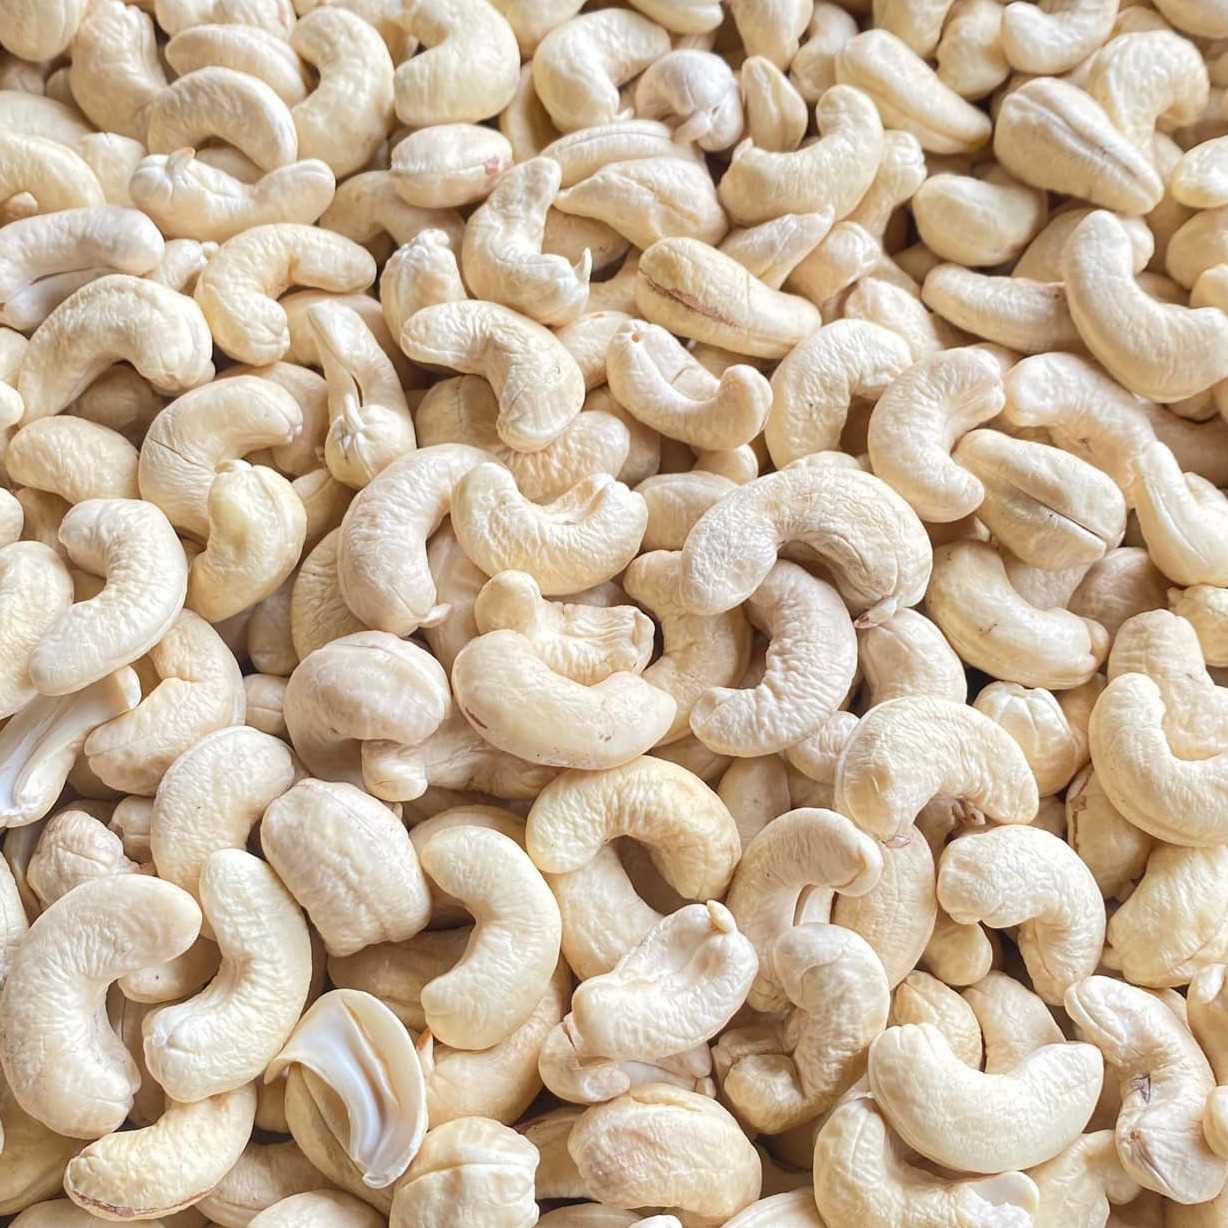 I AM LOOKING FOR CASHEW NUT